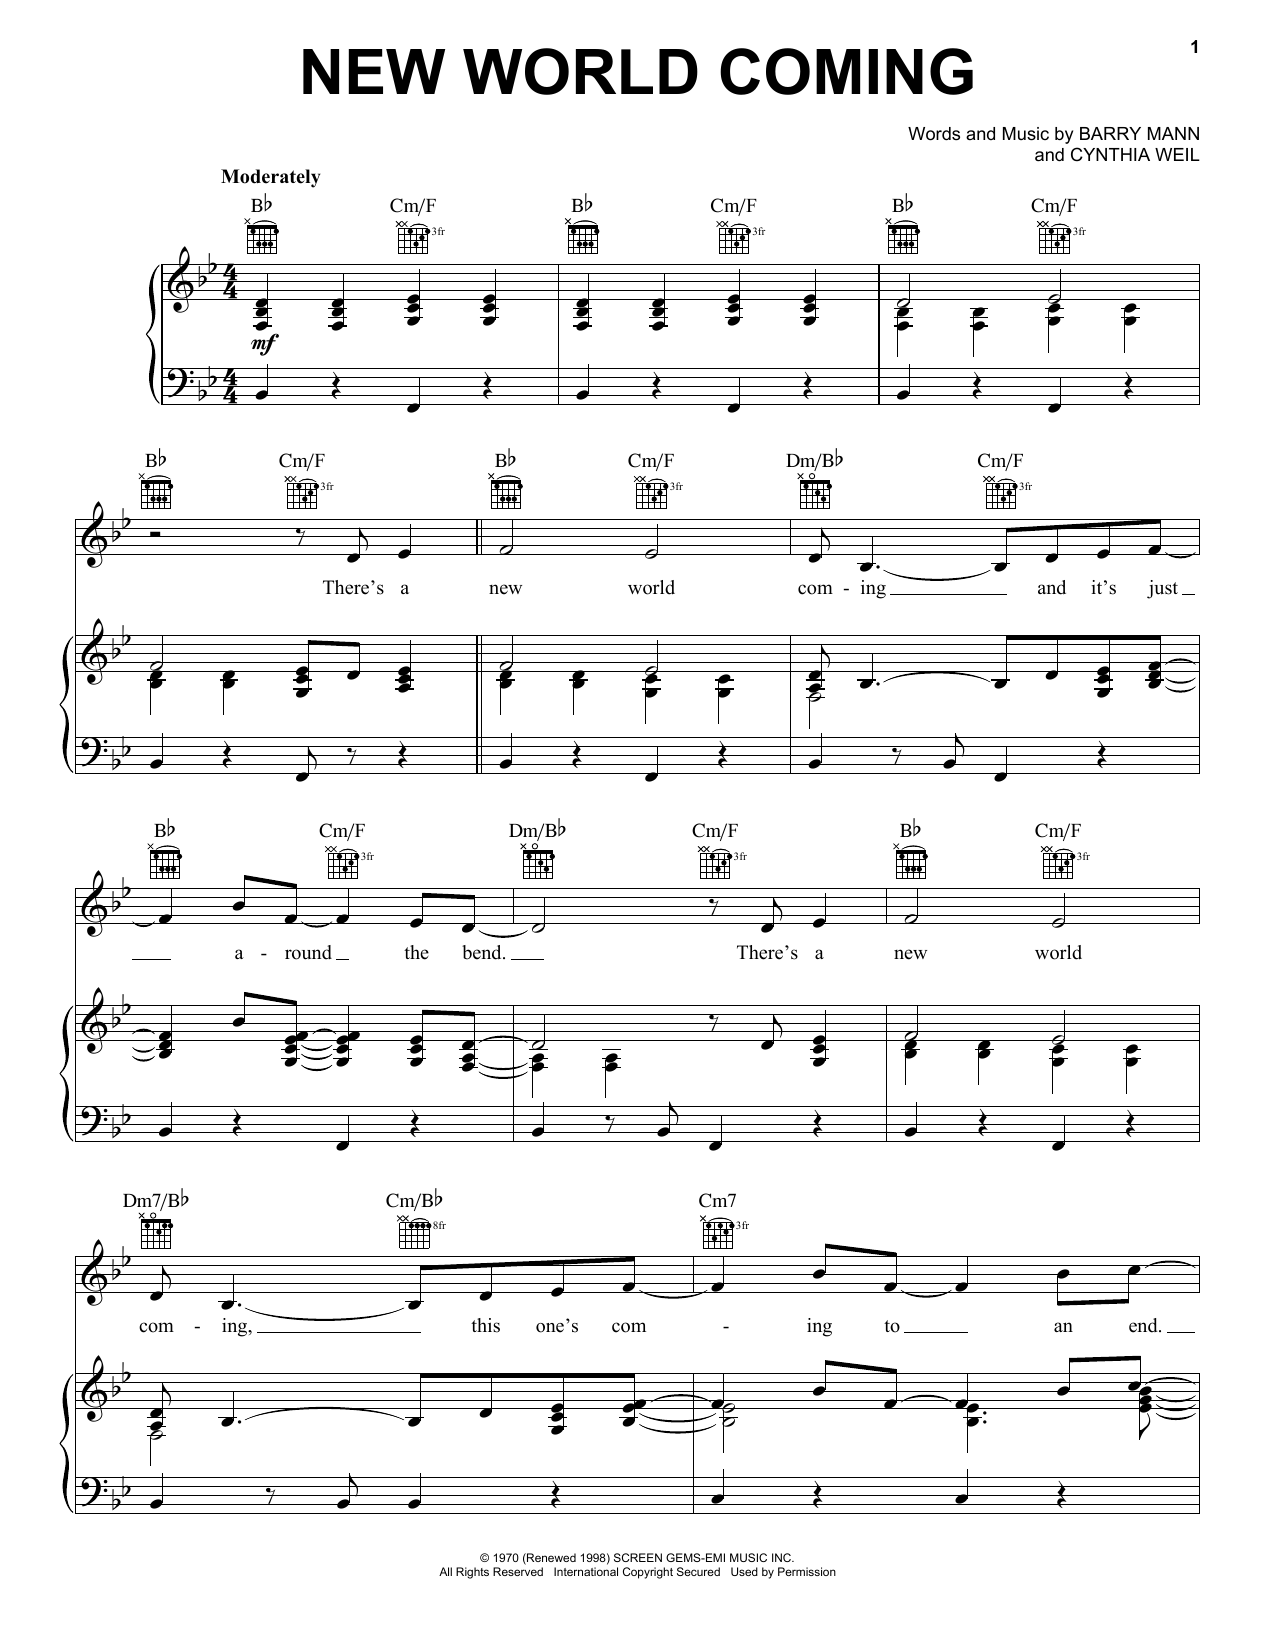 Mama Cass Elliot New World Coming sheet music notes and chords. Download Printable PDF.